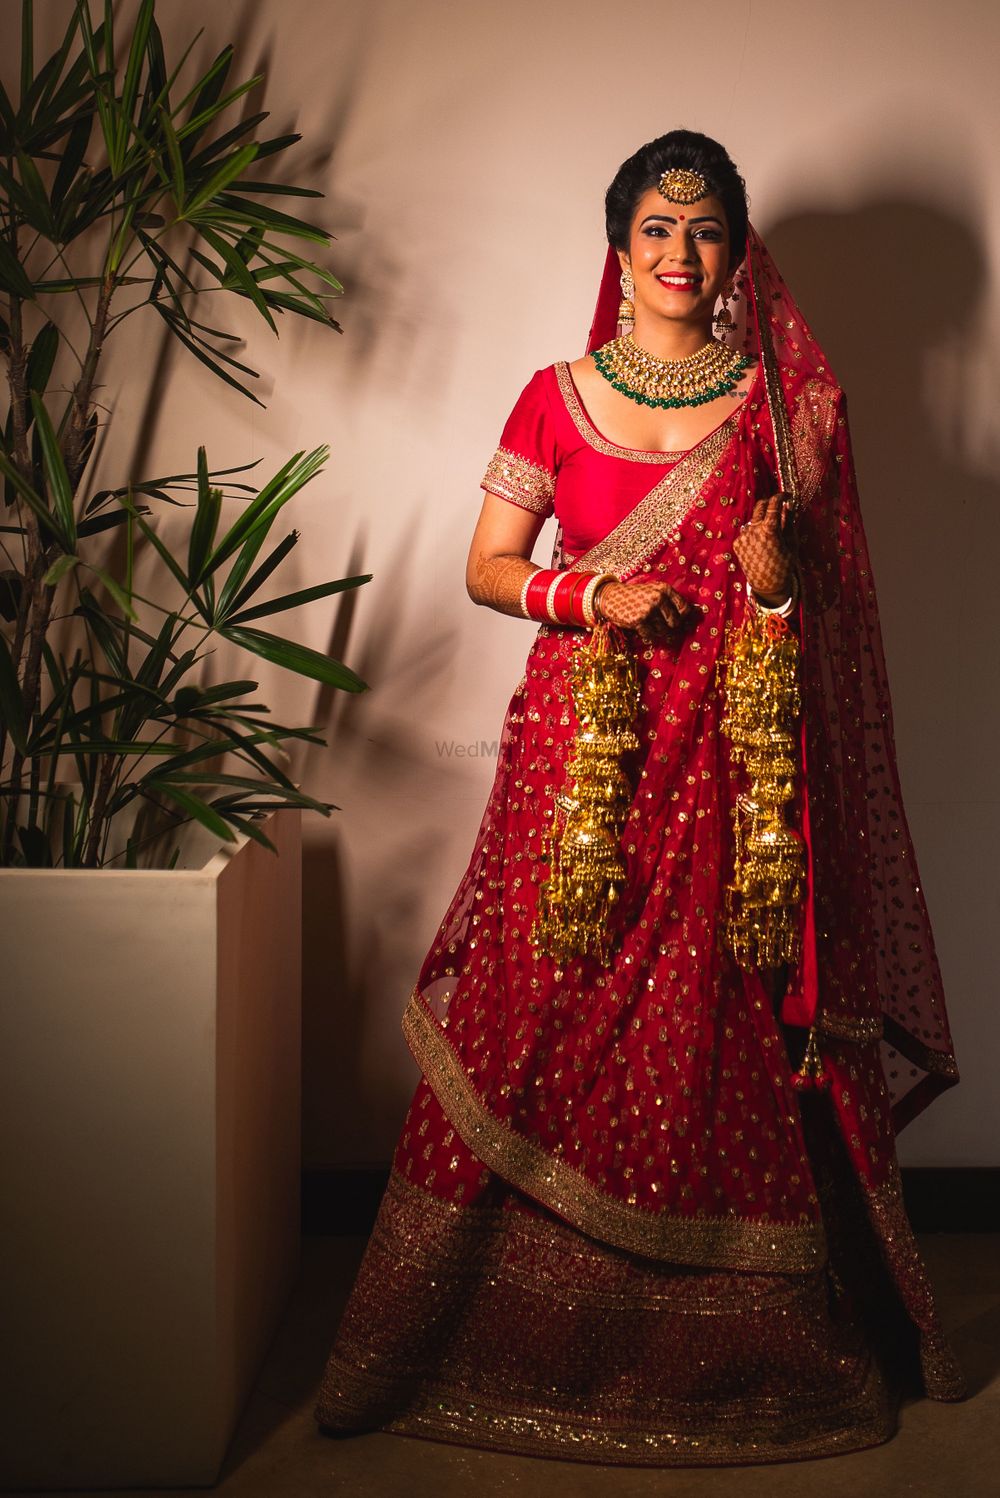 Photo of A bride in a red lehenga and gold kaleera smiles for the camera